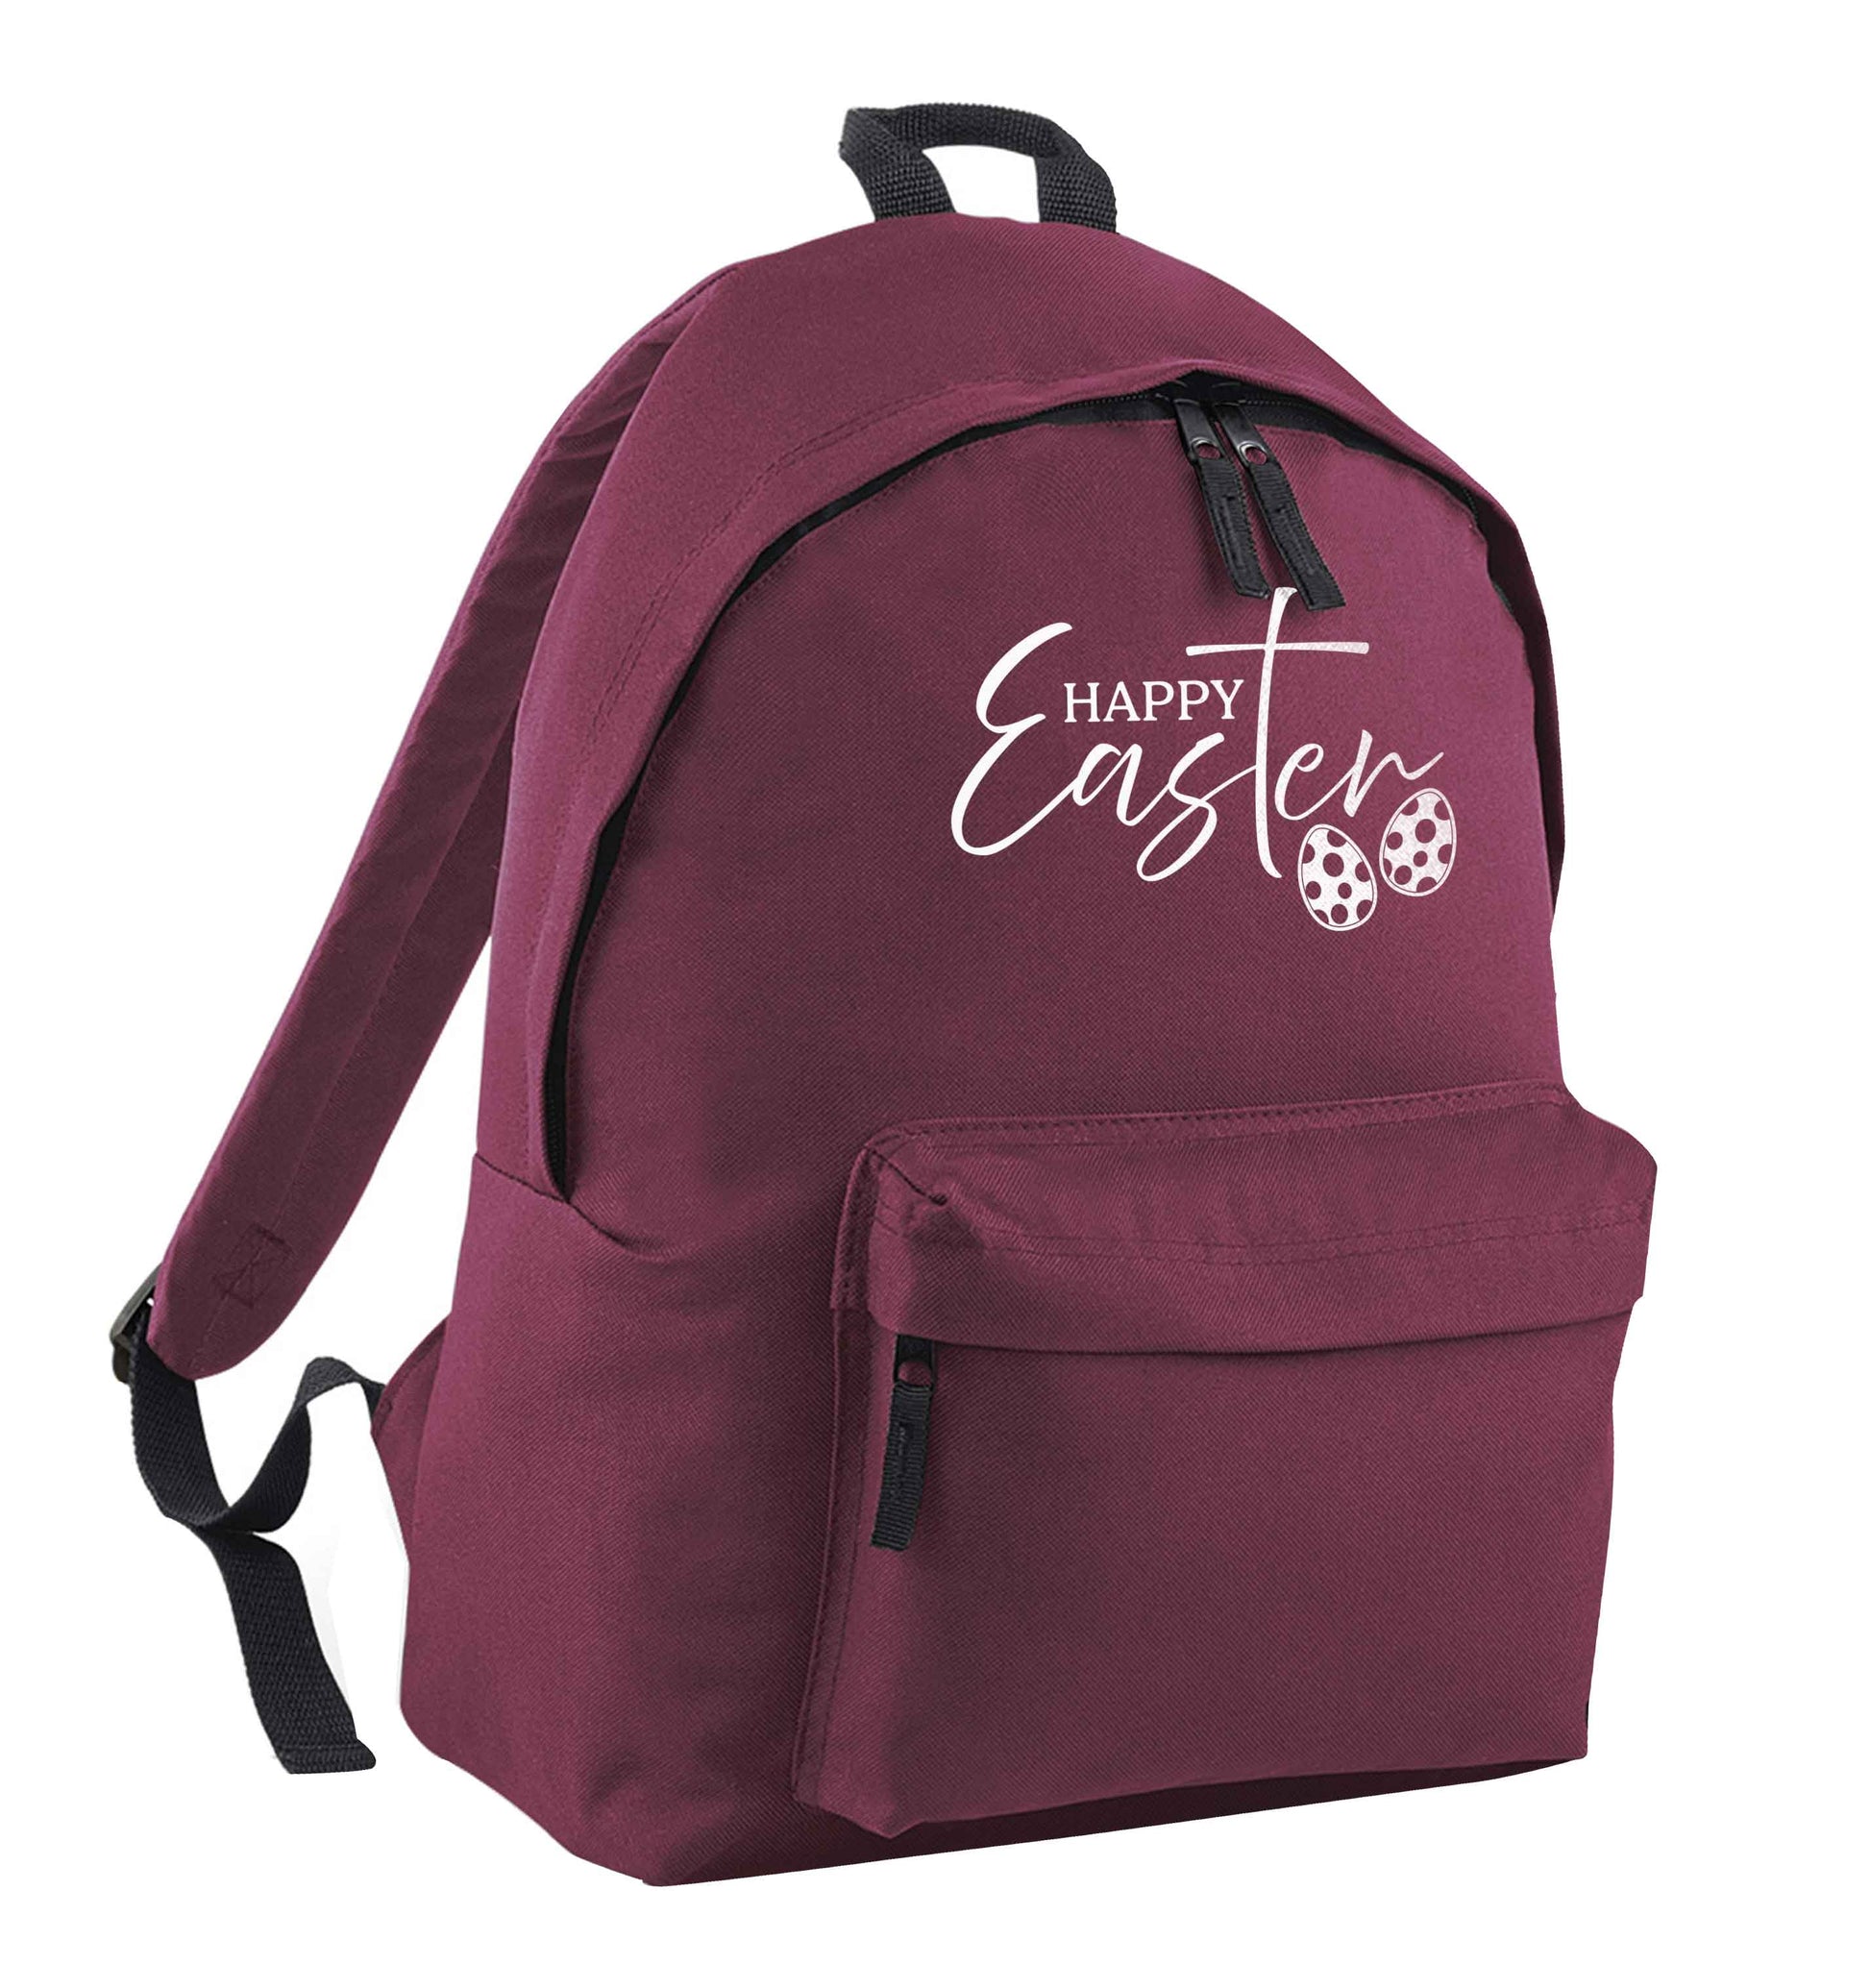 Happy Easter maroon adults backpack